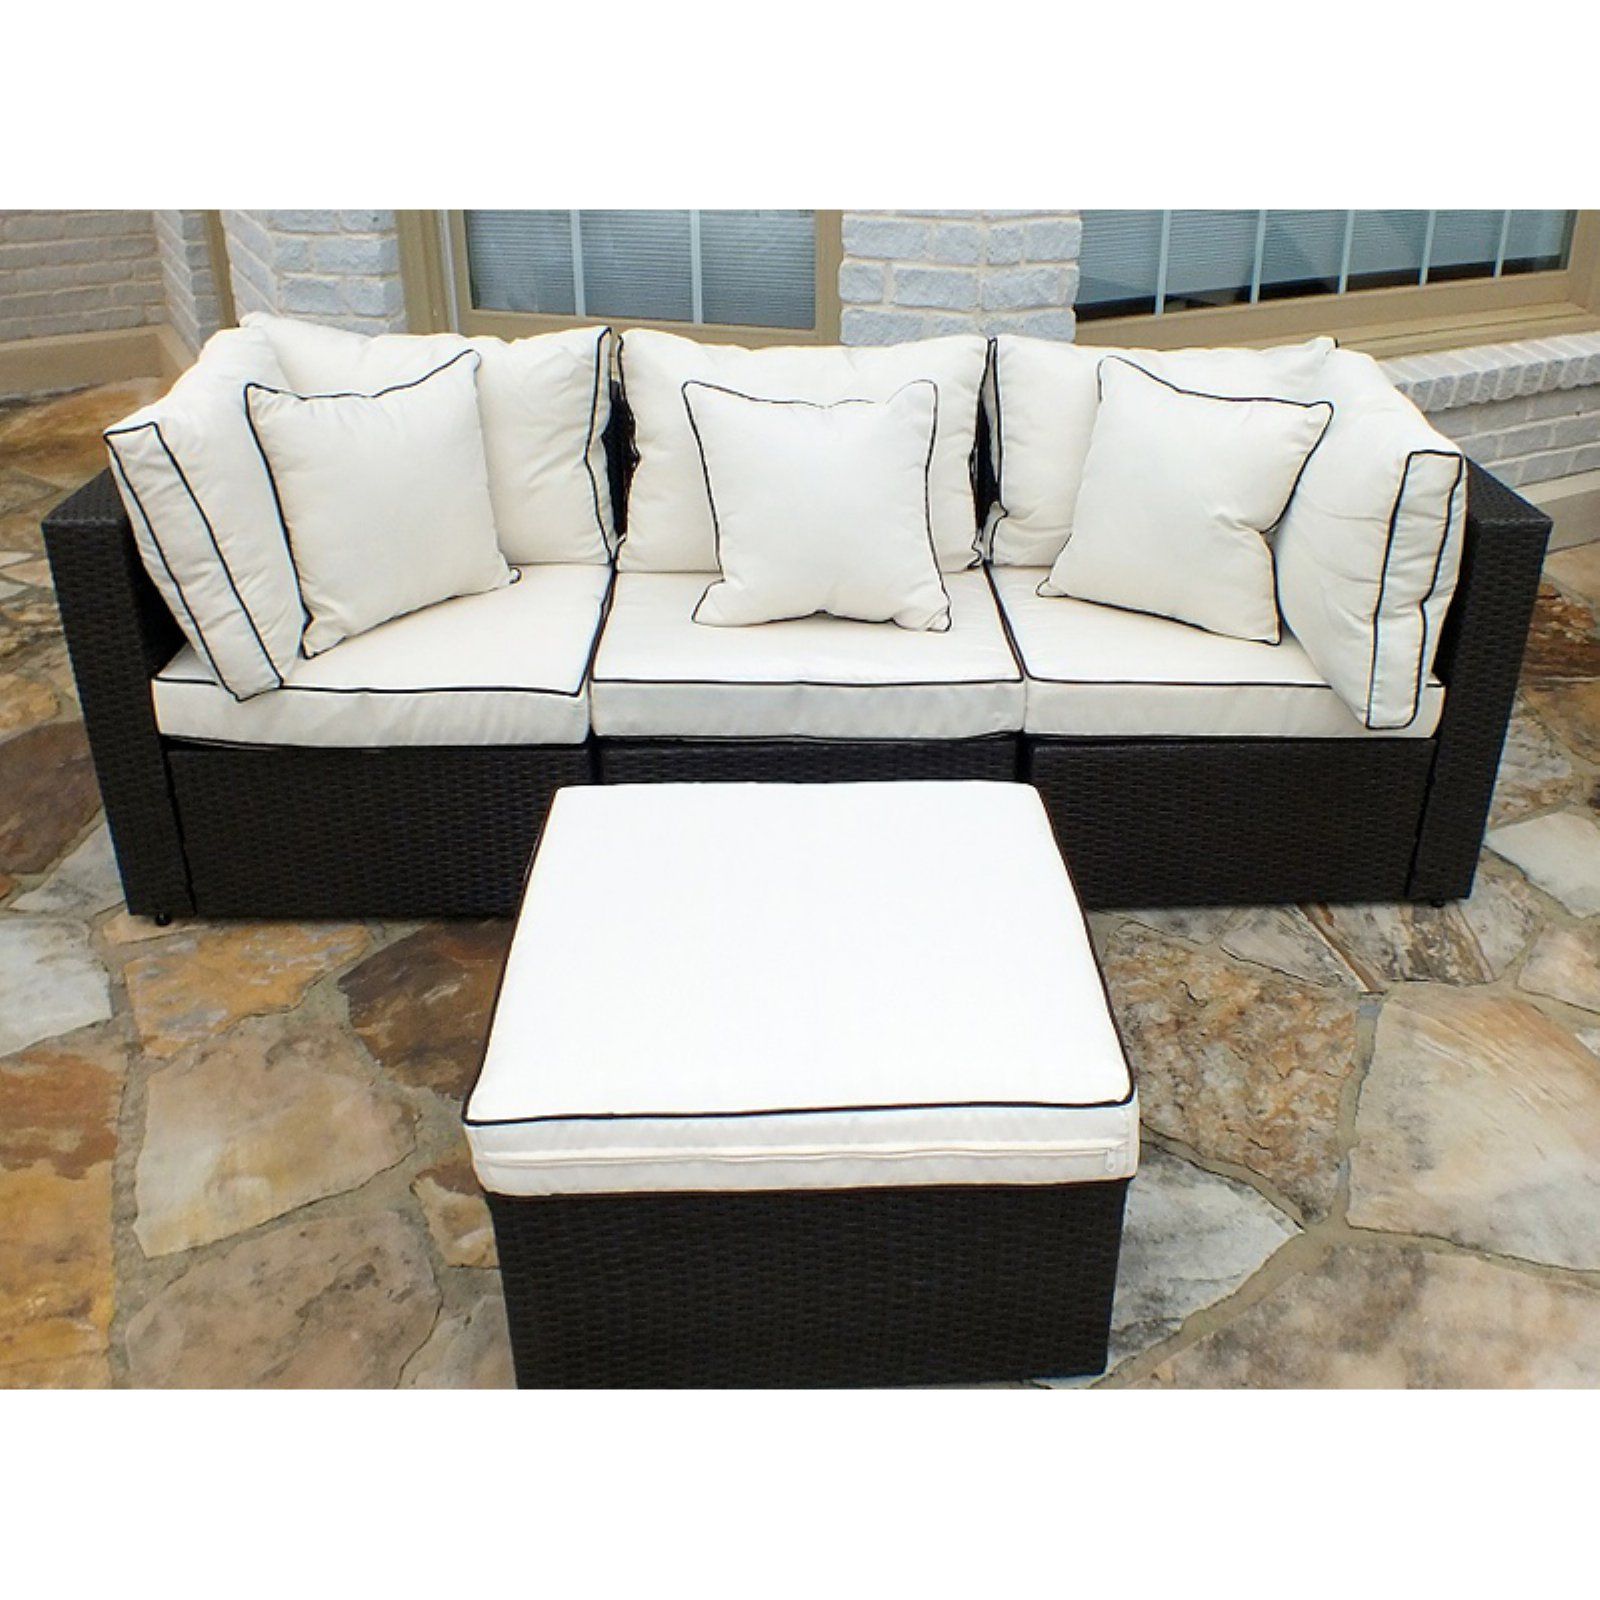 Jj International Hampton Wicker Patio Sofa With Ottoman Intended For Hamptons Sofas (View 5 of 15)